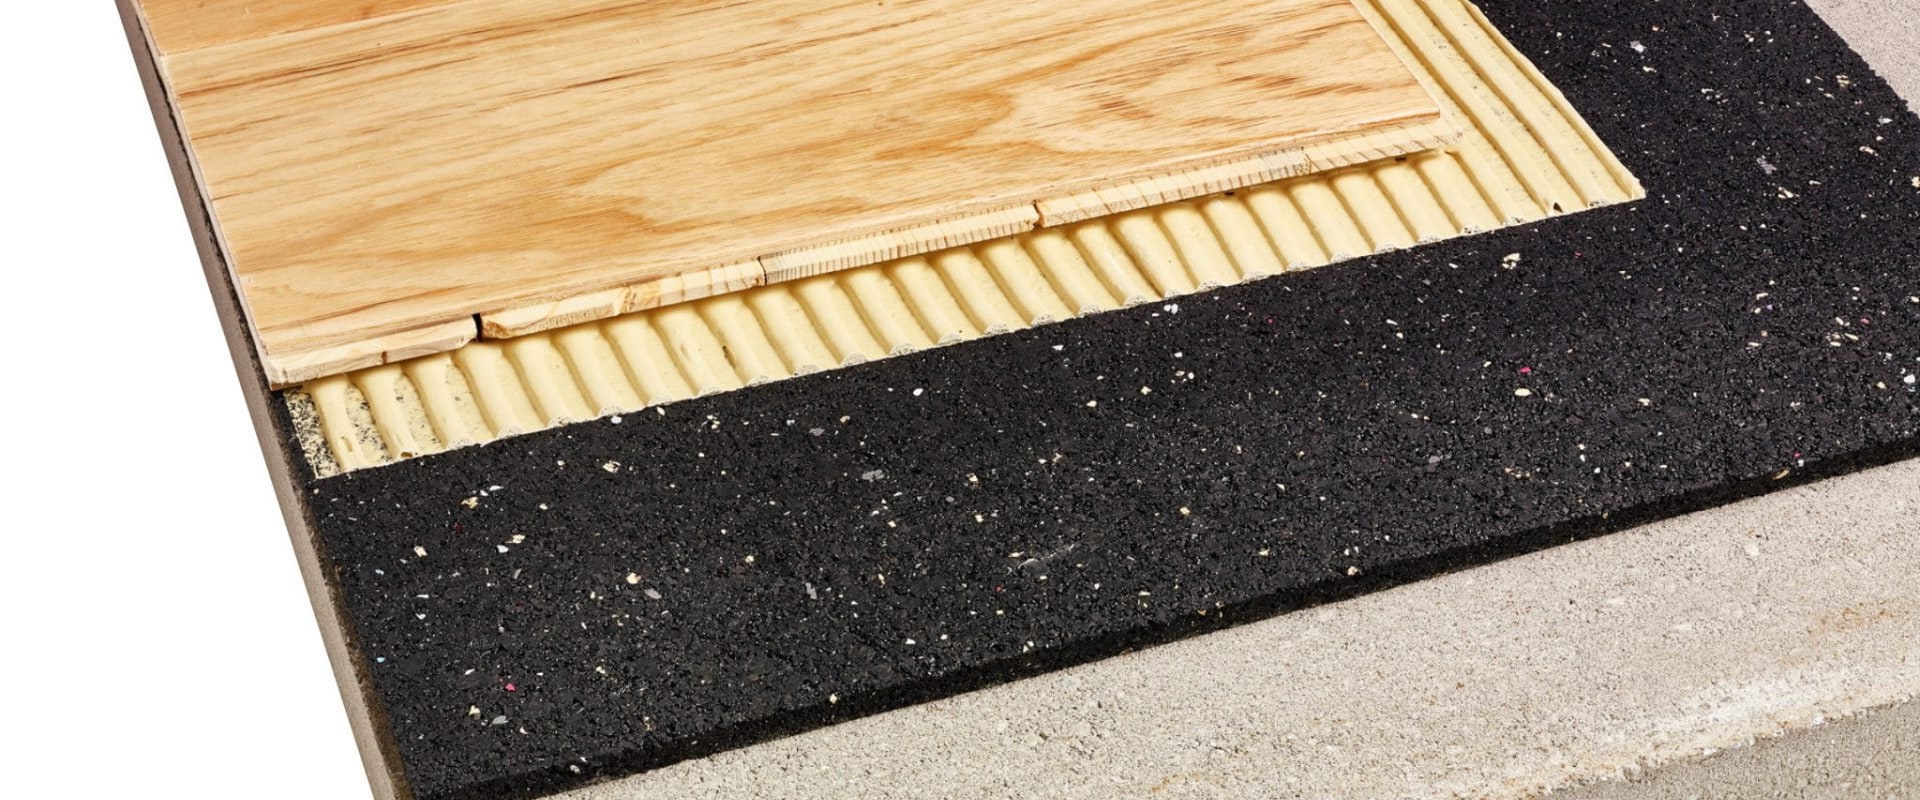 Is Acoustic Underlay Worth It?